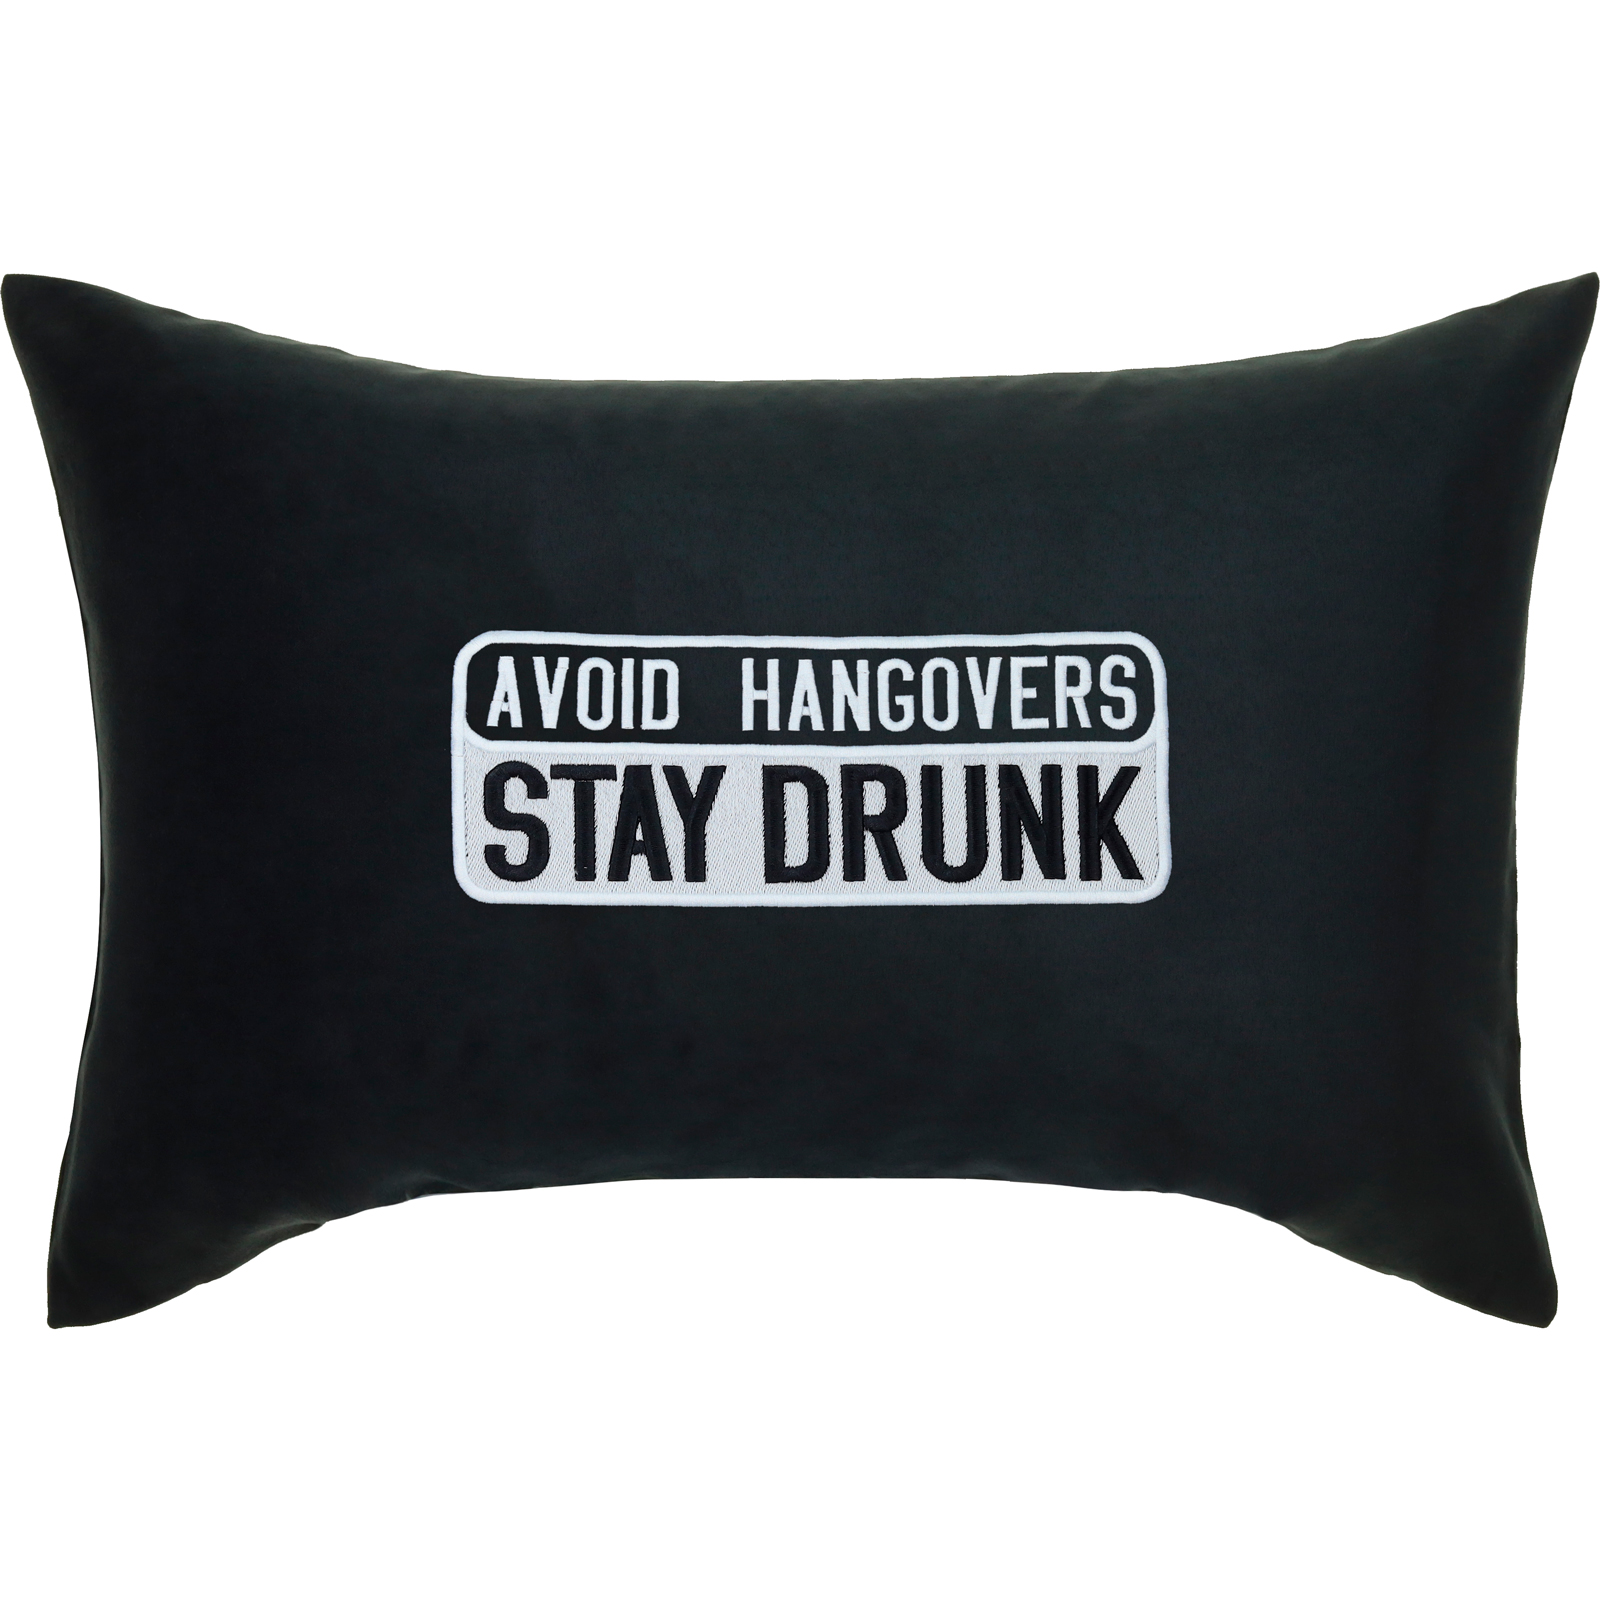 Avoid Hangovers - Stay Drunk